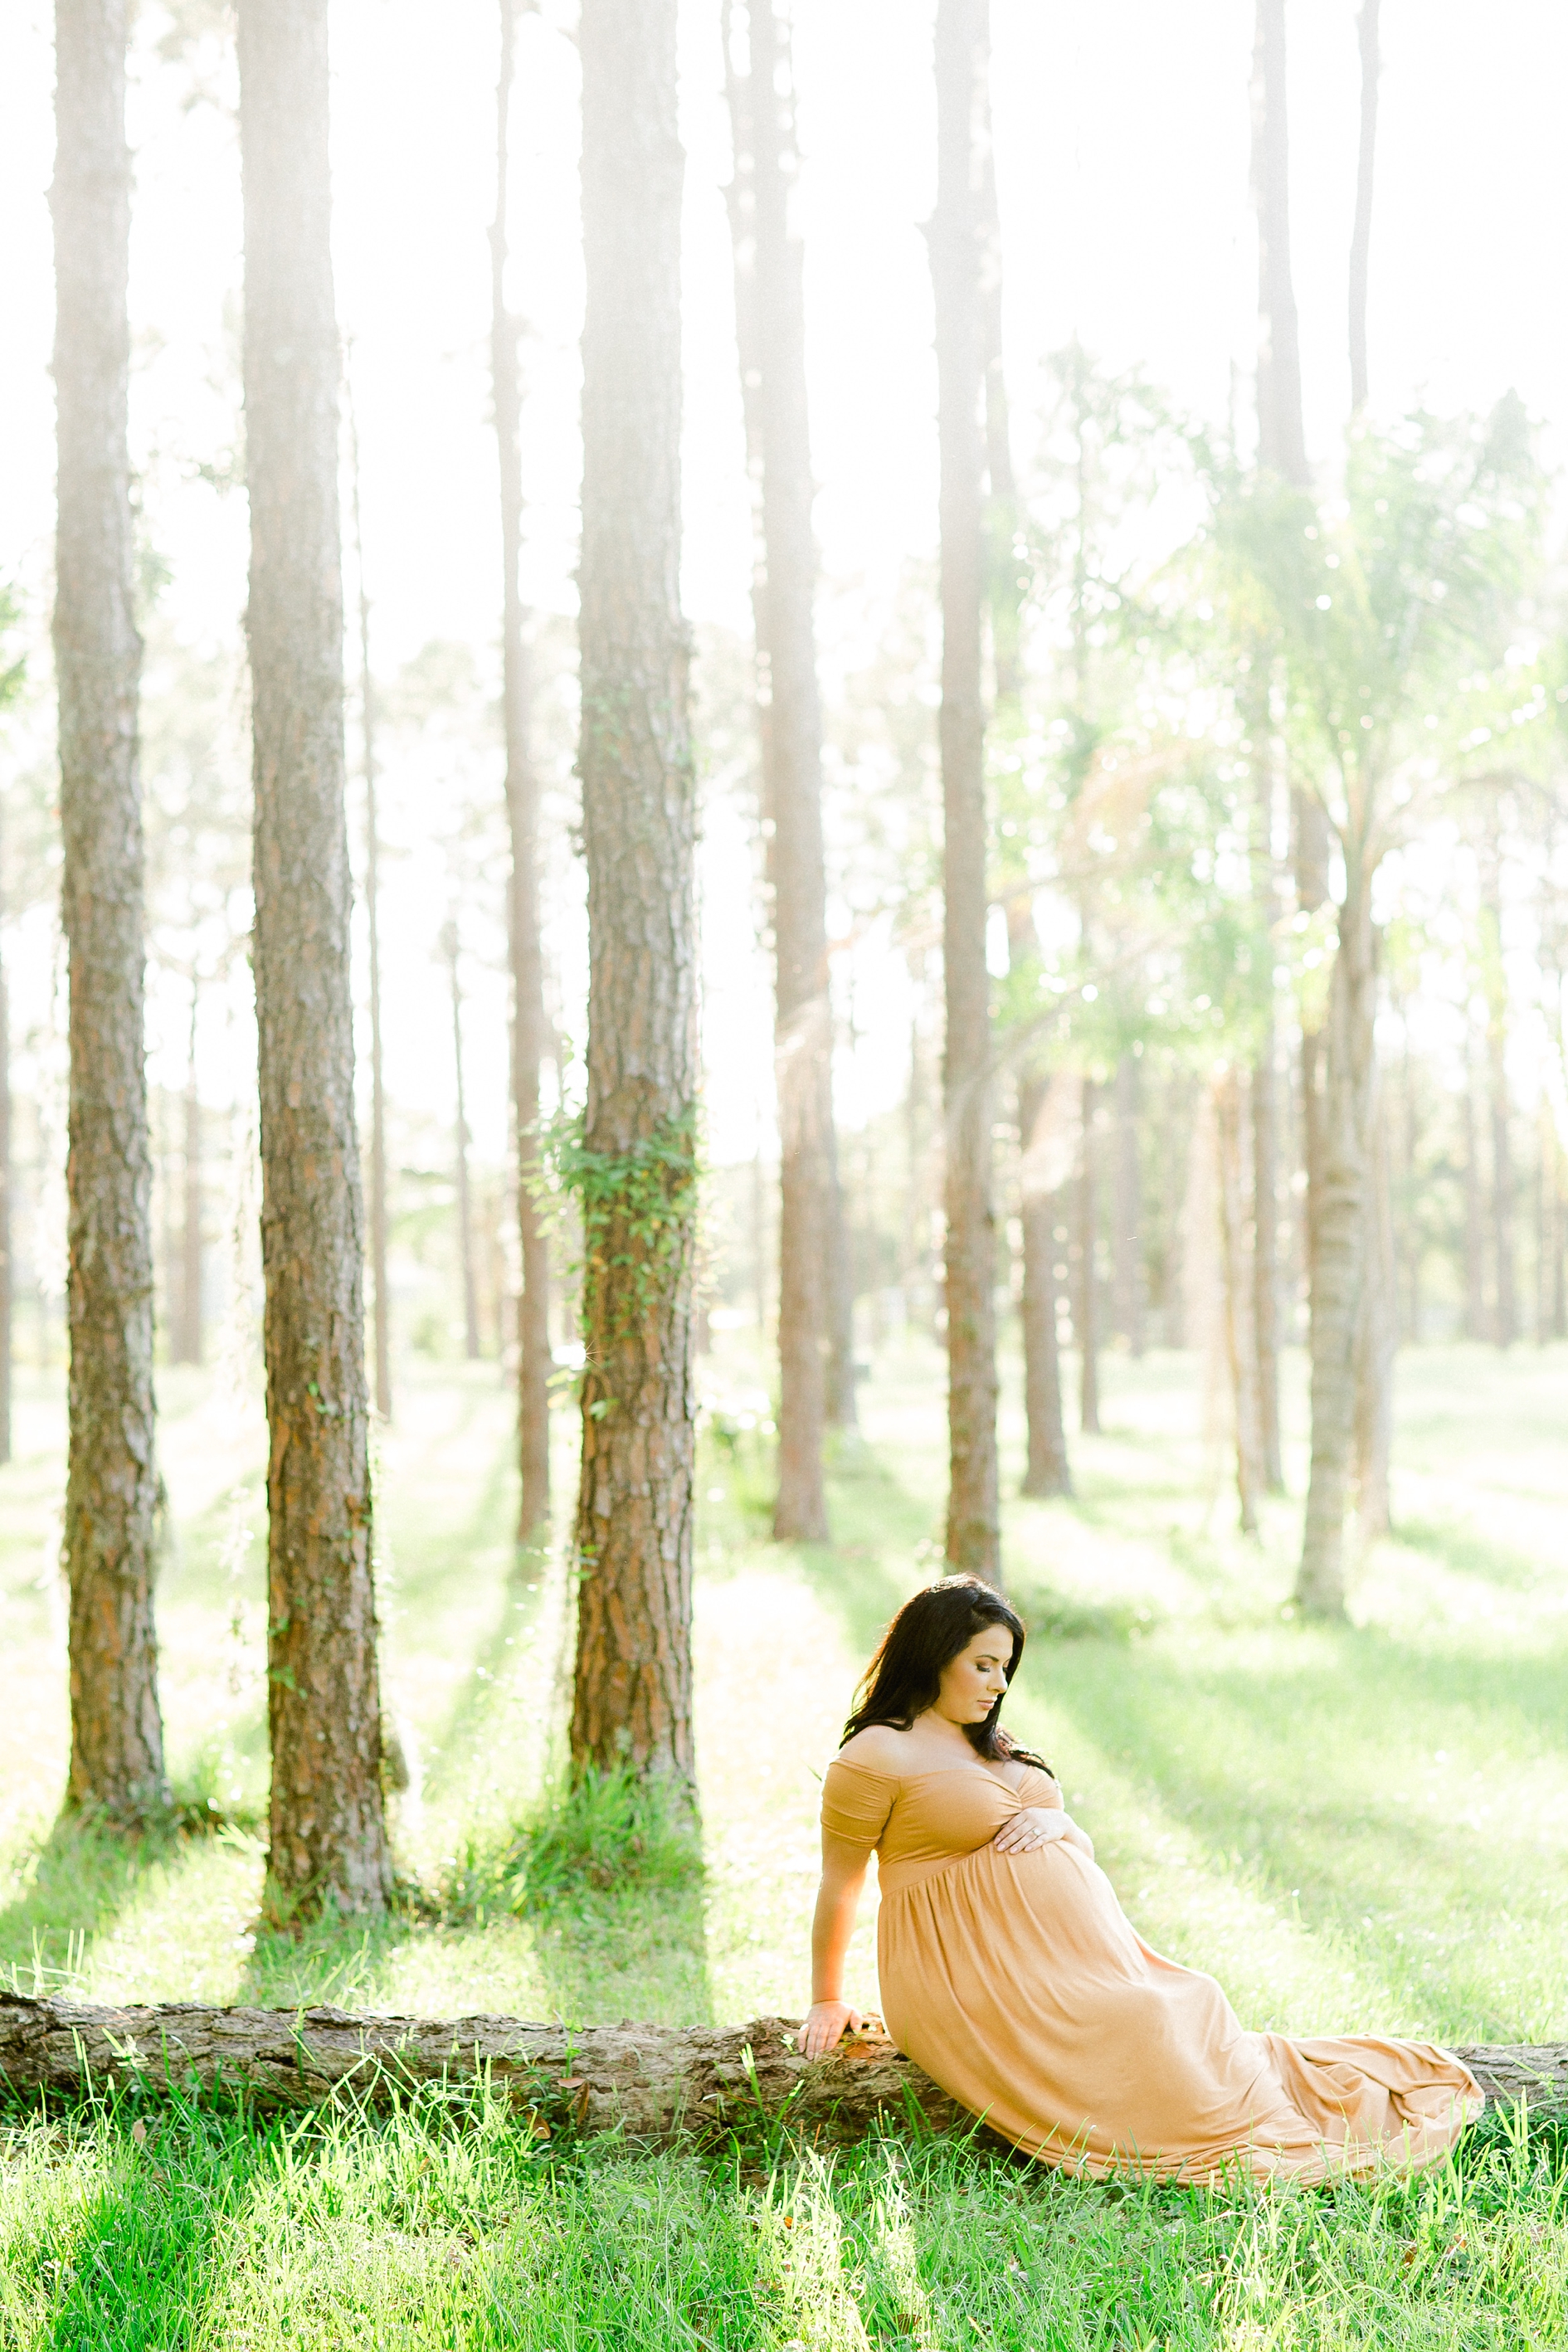 Tampa Maternity Photographer | © Ailyn La Torre Photography 2017